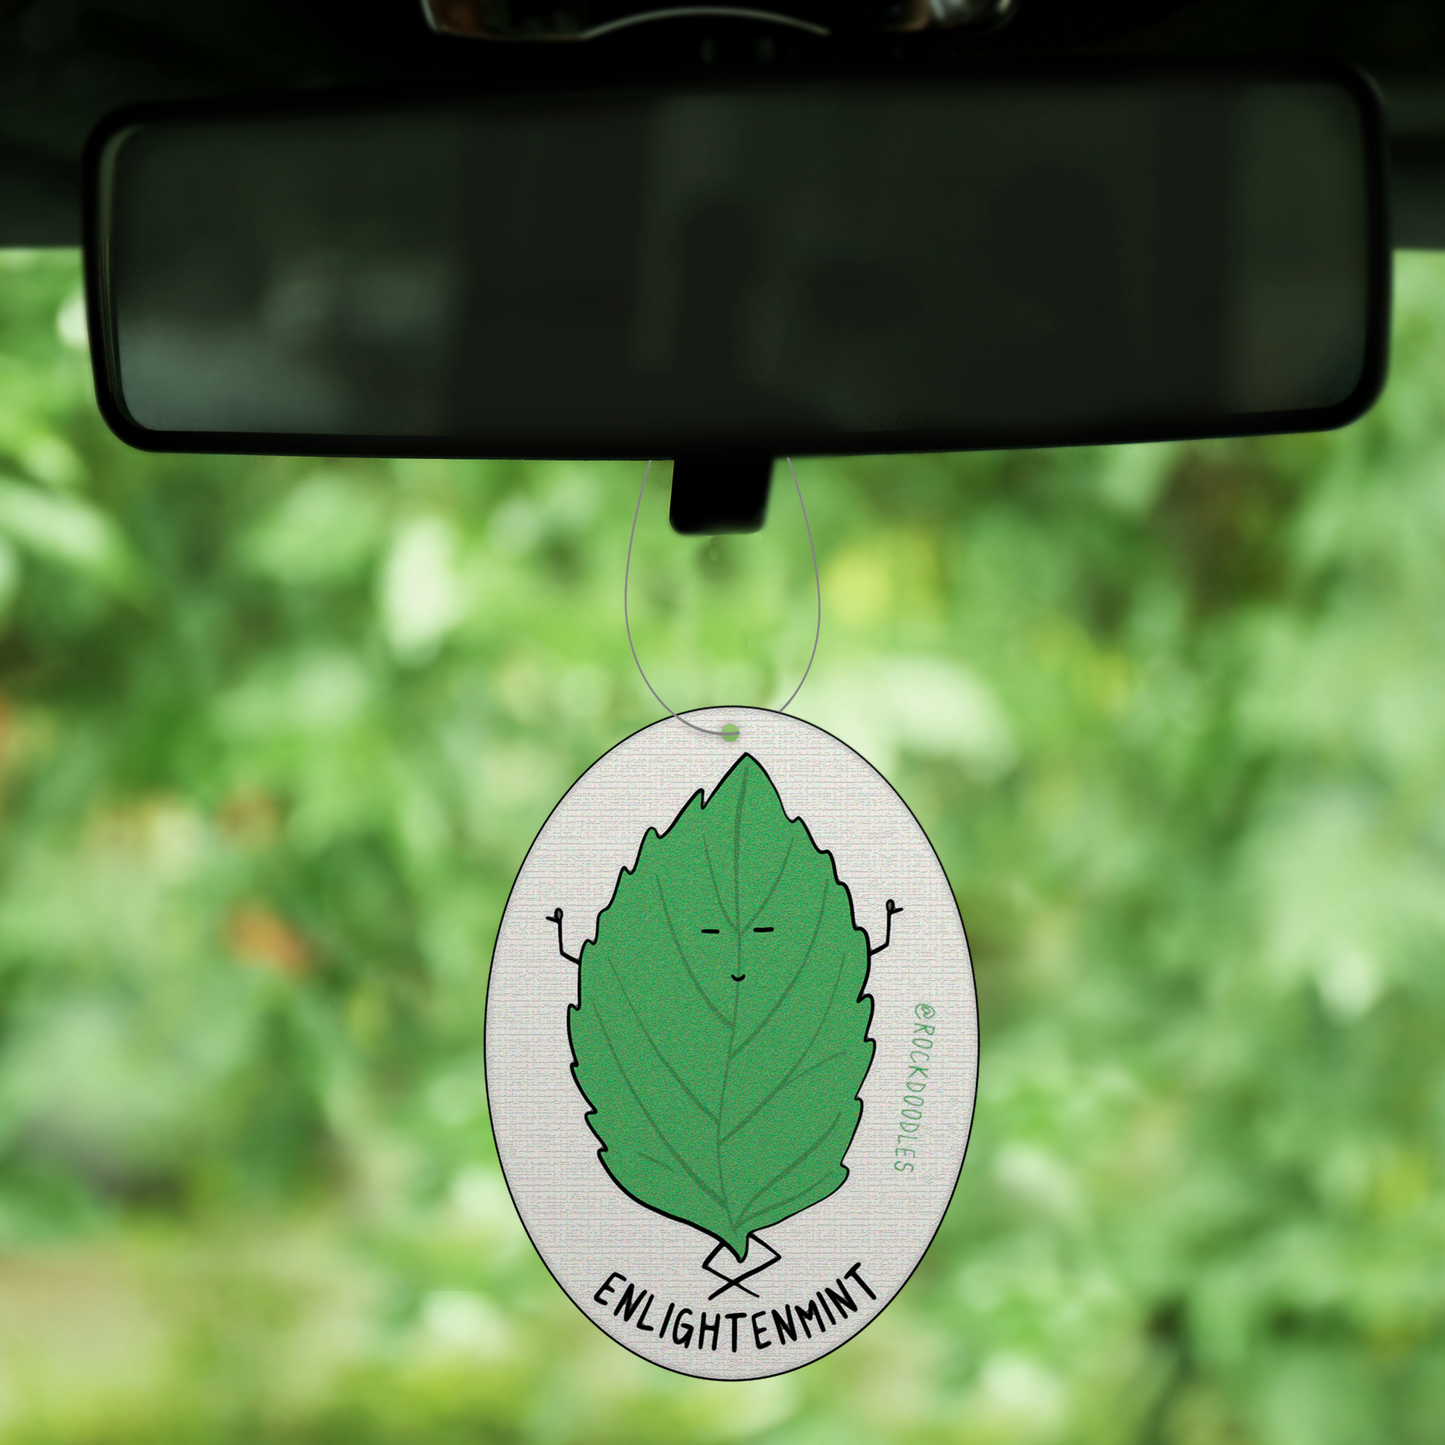 A 2-pack car air freshener with a leaf on it, featuring a Fresh Peppermint Scent.
Product: rockdoodles Enlightenmint (2-Pack) Punny Air Freshener - Fresh Peppermint Scent.